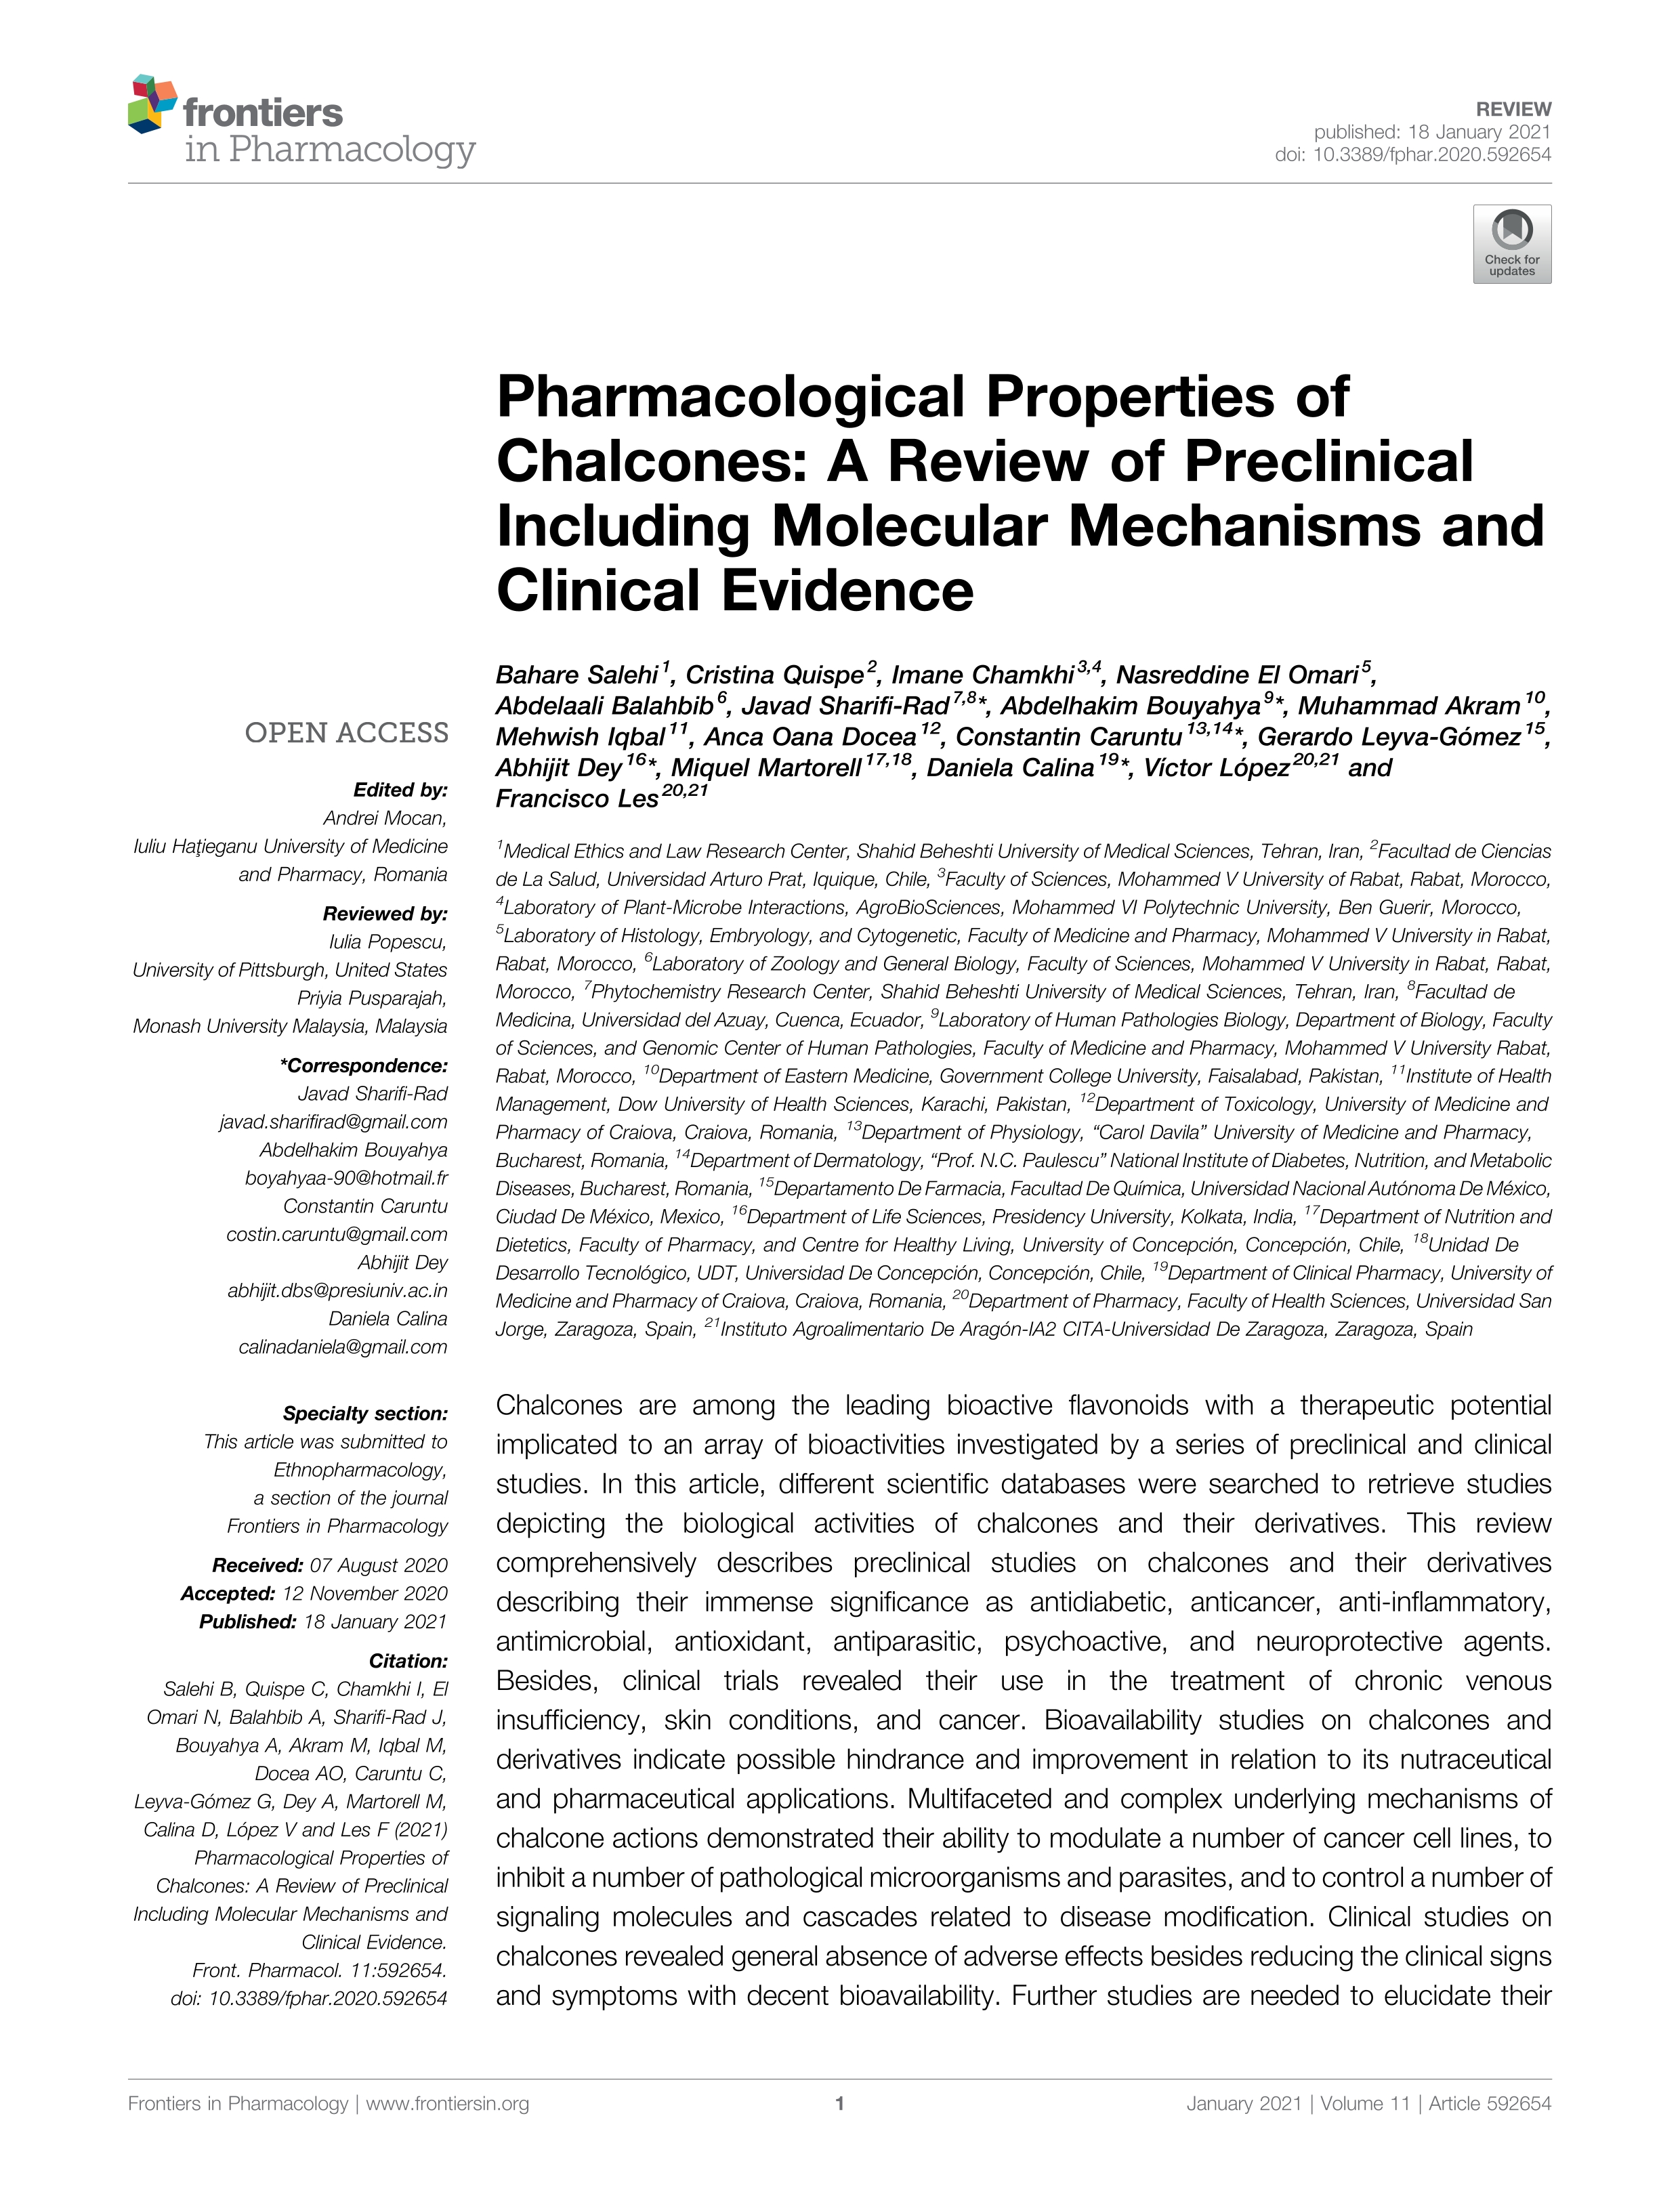 Pharmacological Properties of Chalcones: A Review of Preclinical Including Molecular Mechanisms and Clinical Evidence